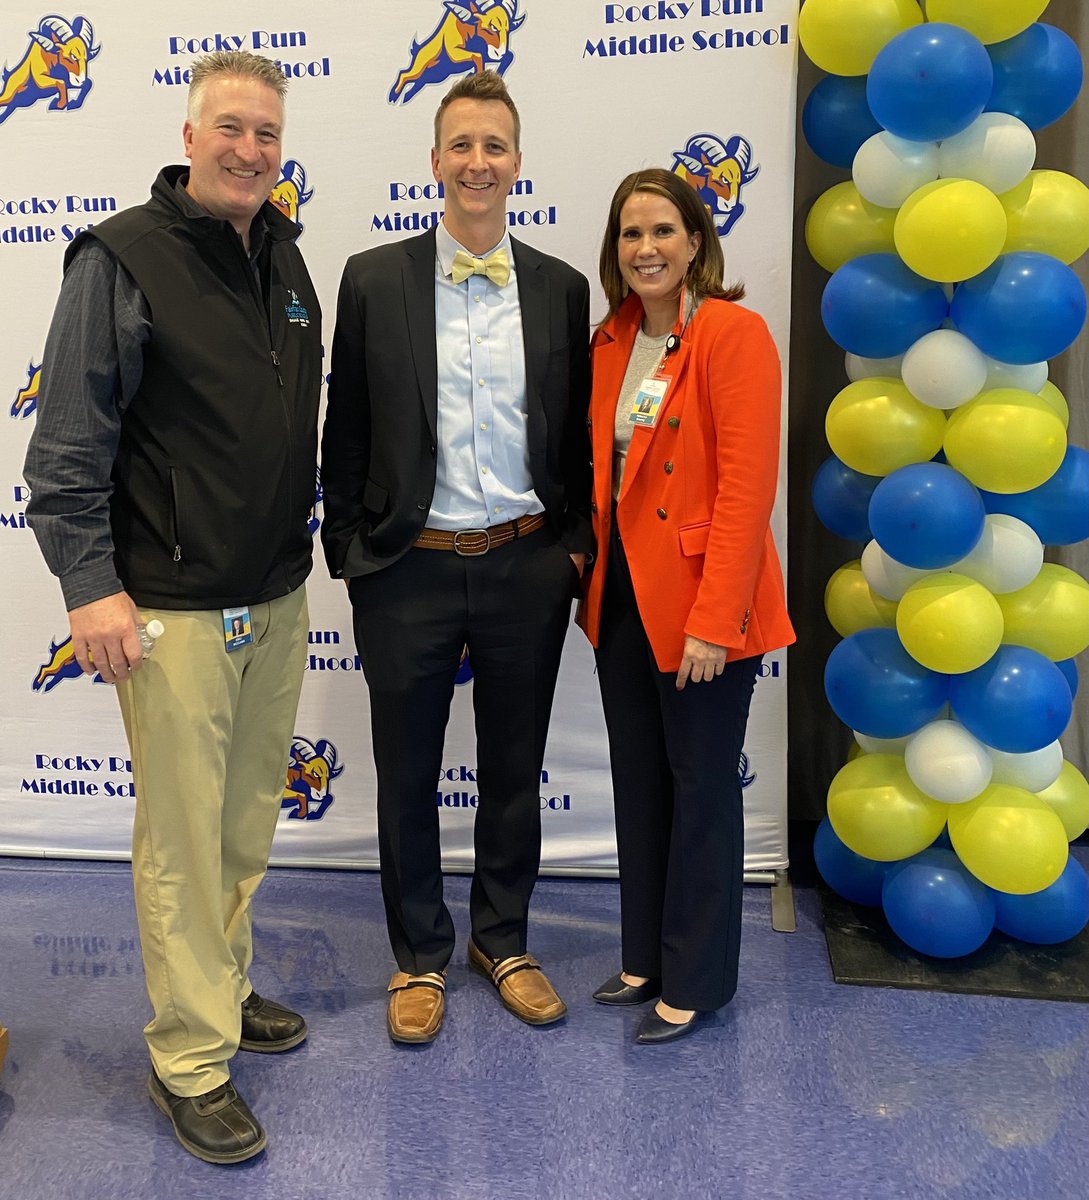 Congratulations to Peter Kownacki, newly appointed principal of @RockyRunMS! Mr. Kownacki will assume his new position on July 3. Once a ram, always a ram.